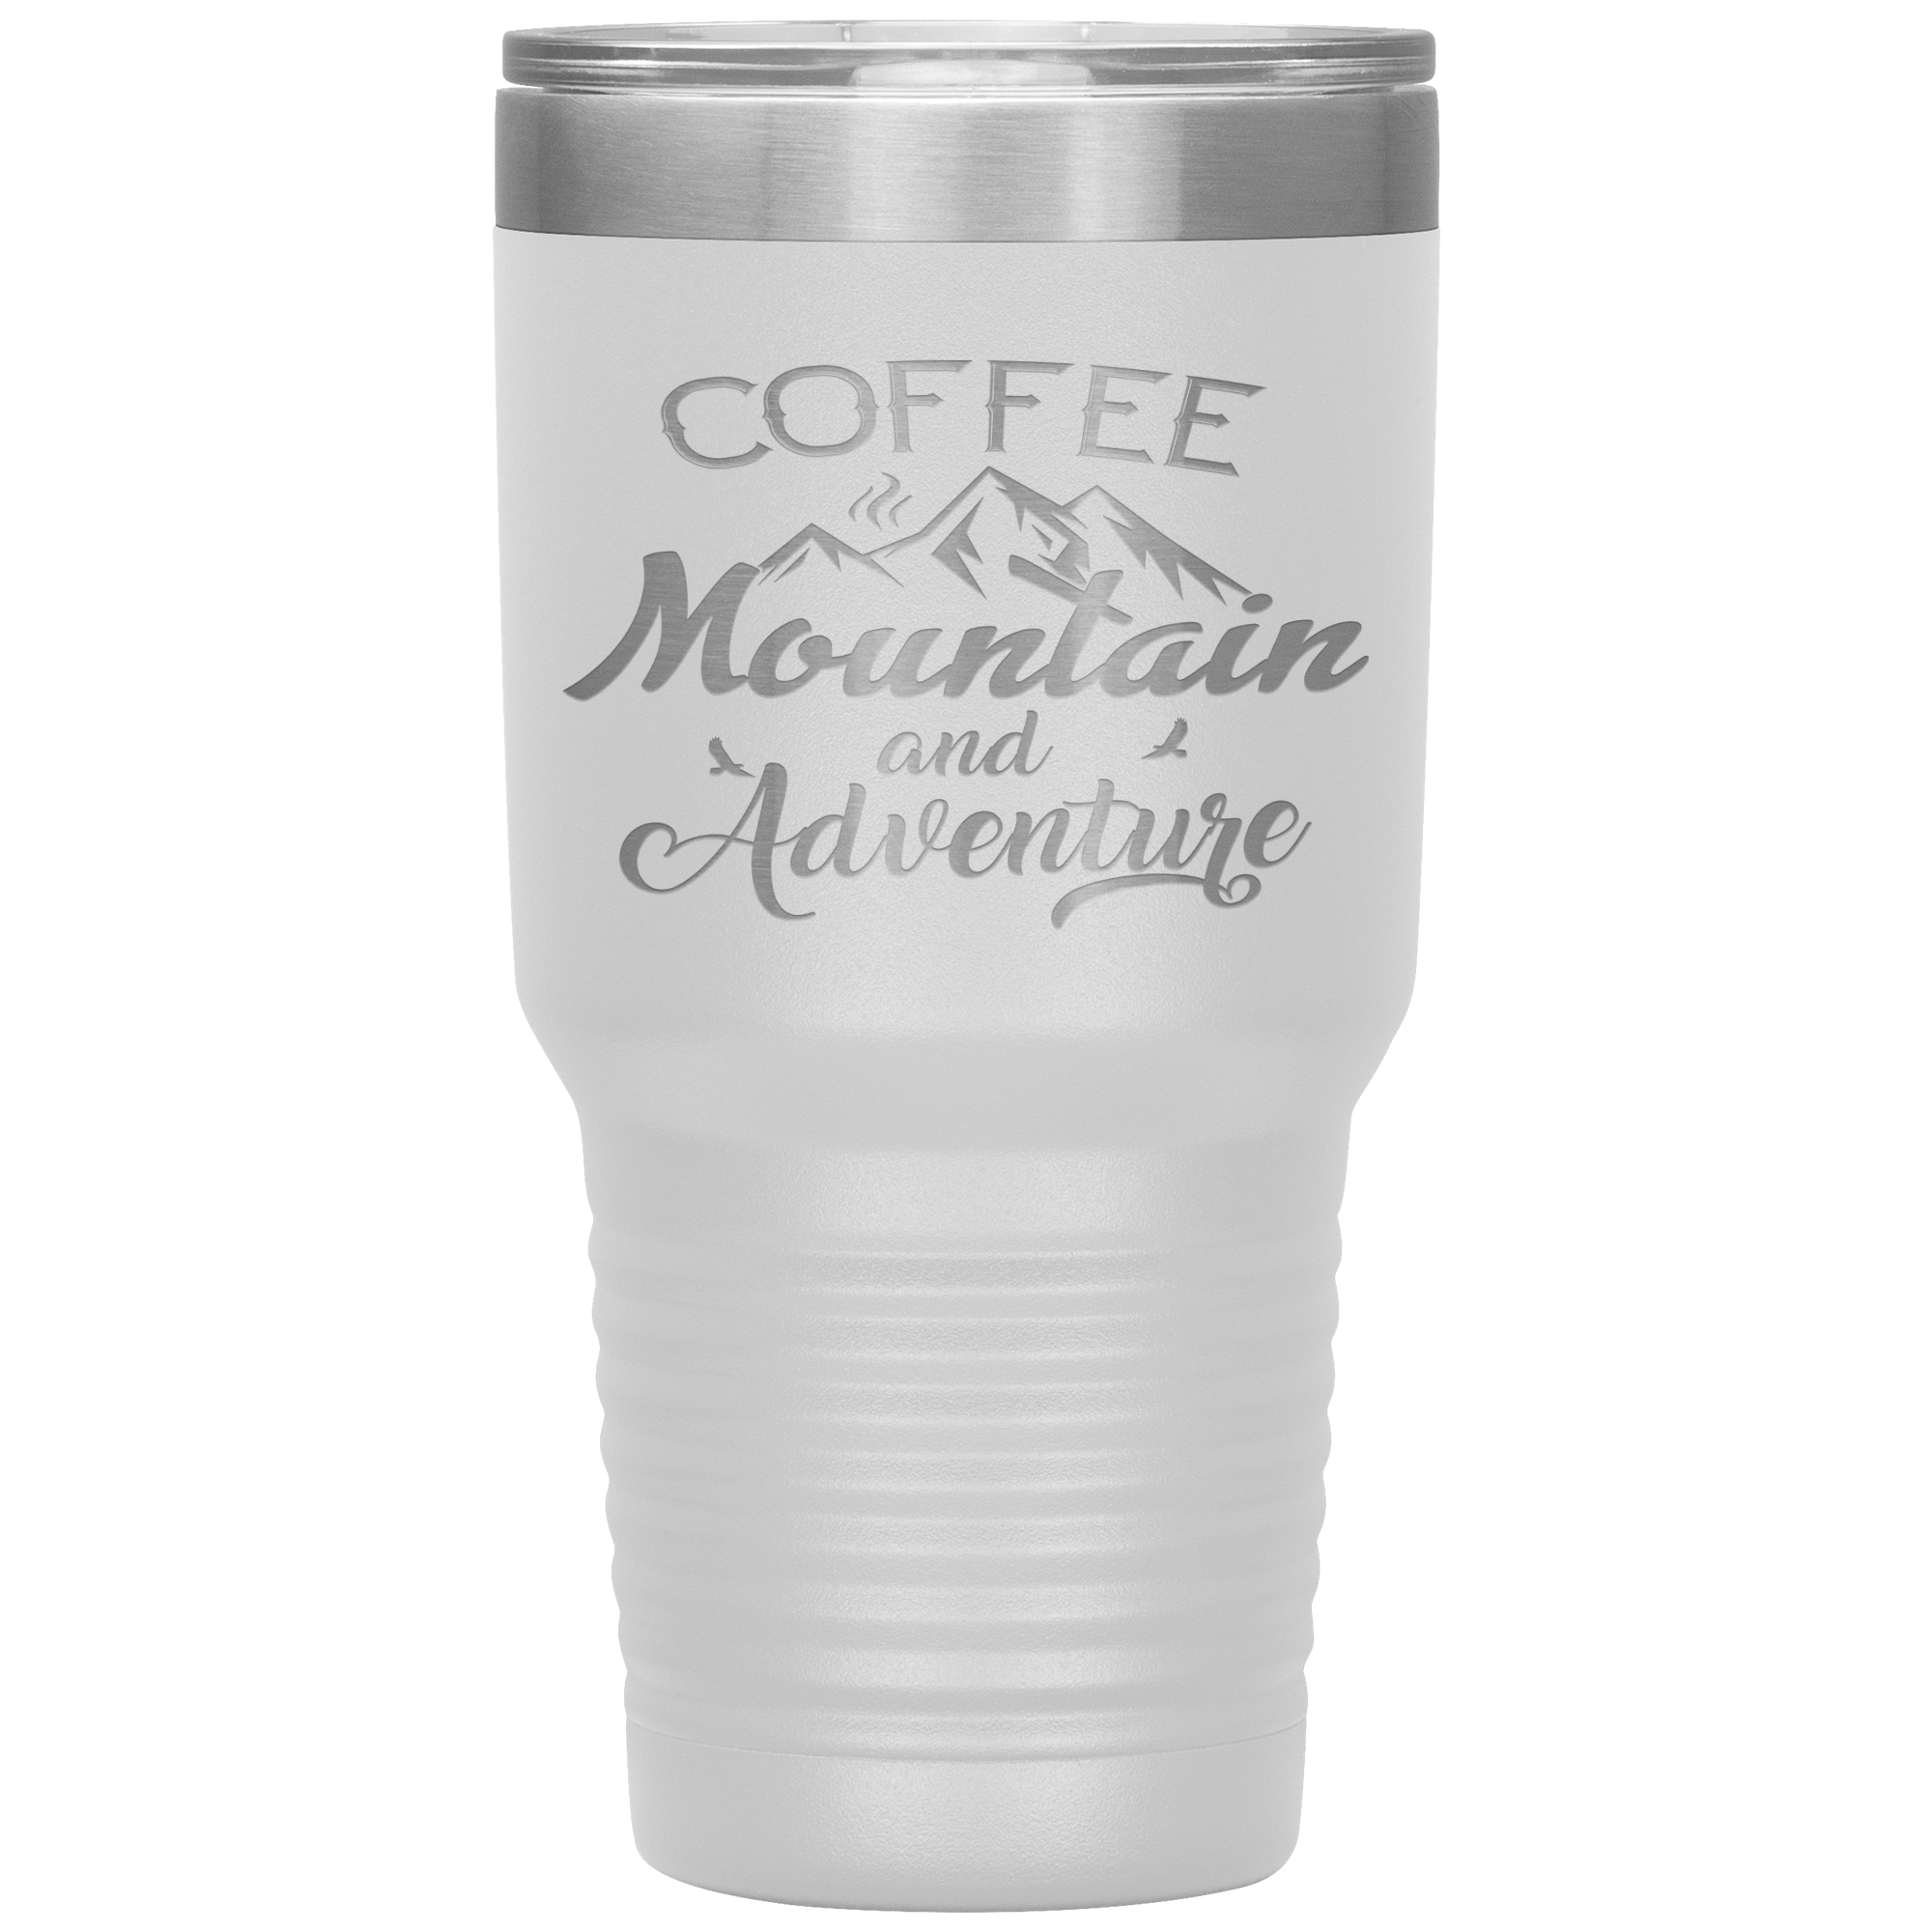 "COFFEE MOUNTAIN AND ADVENTURE"